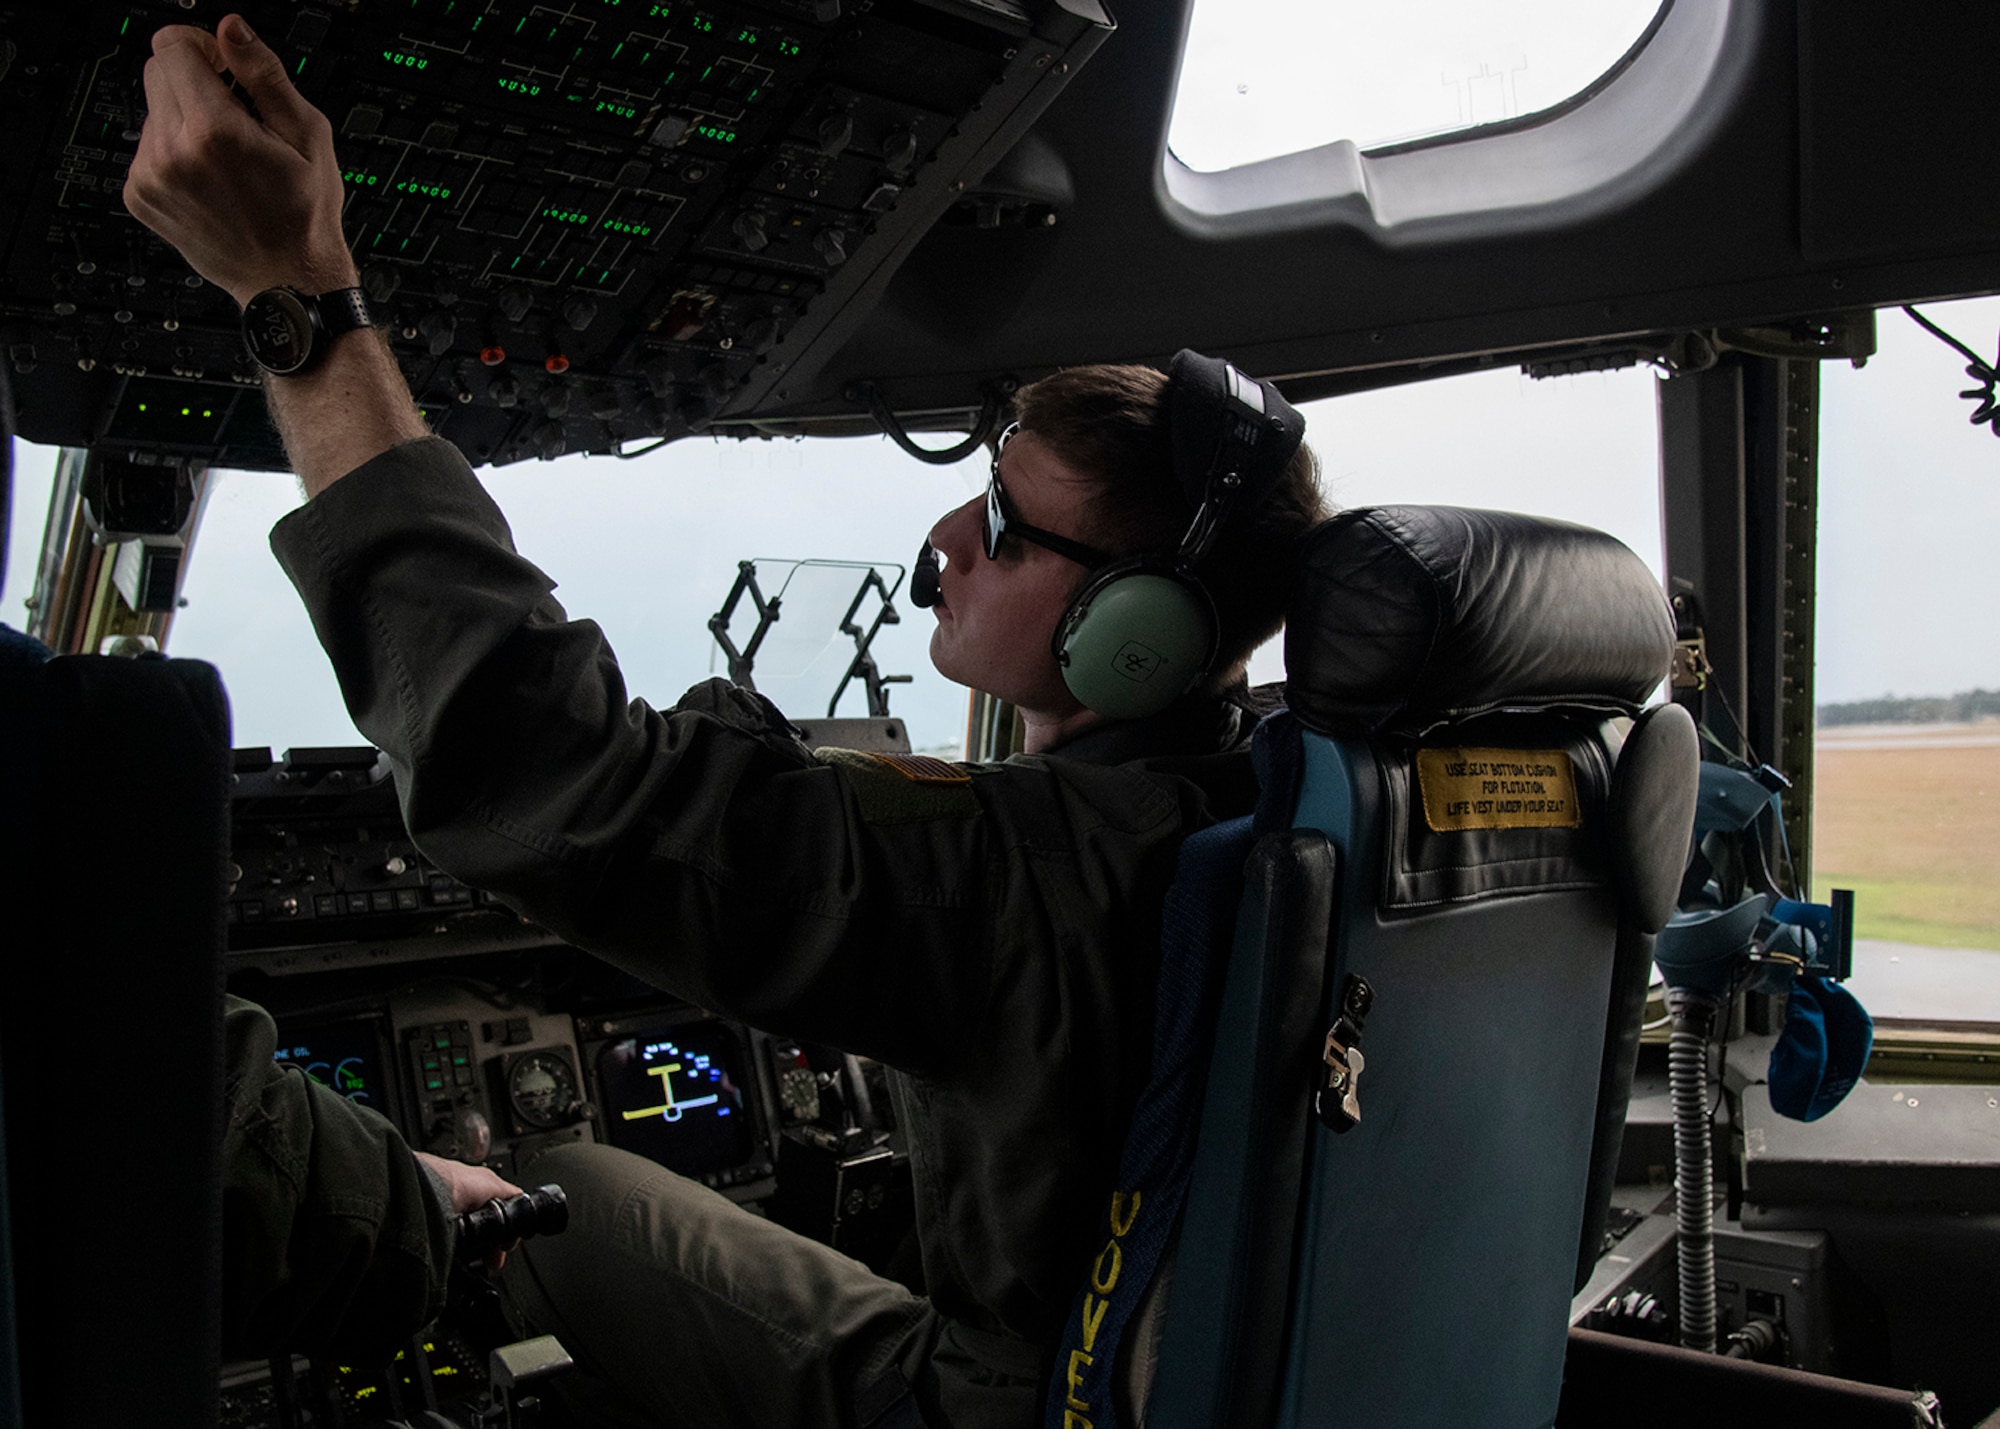 1st Lt. Marcus Malecek, a C-17 Globemaster III pilot, prepares for takeoff March 3, 2019, from Dover Air Force Base, Del., as a part of Exercise Jersey Devil 19. The exercise is intended to ensure Airmen are ready to respond to complex threats in any environment both now and in the future. (U.S. Air Force photo by Airman 1st Class Zoe M. Wockenfuss)